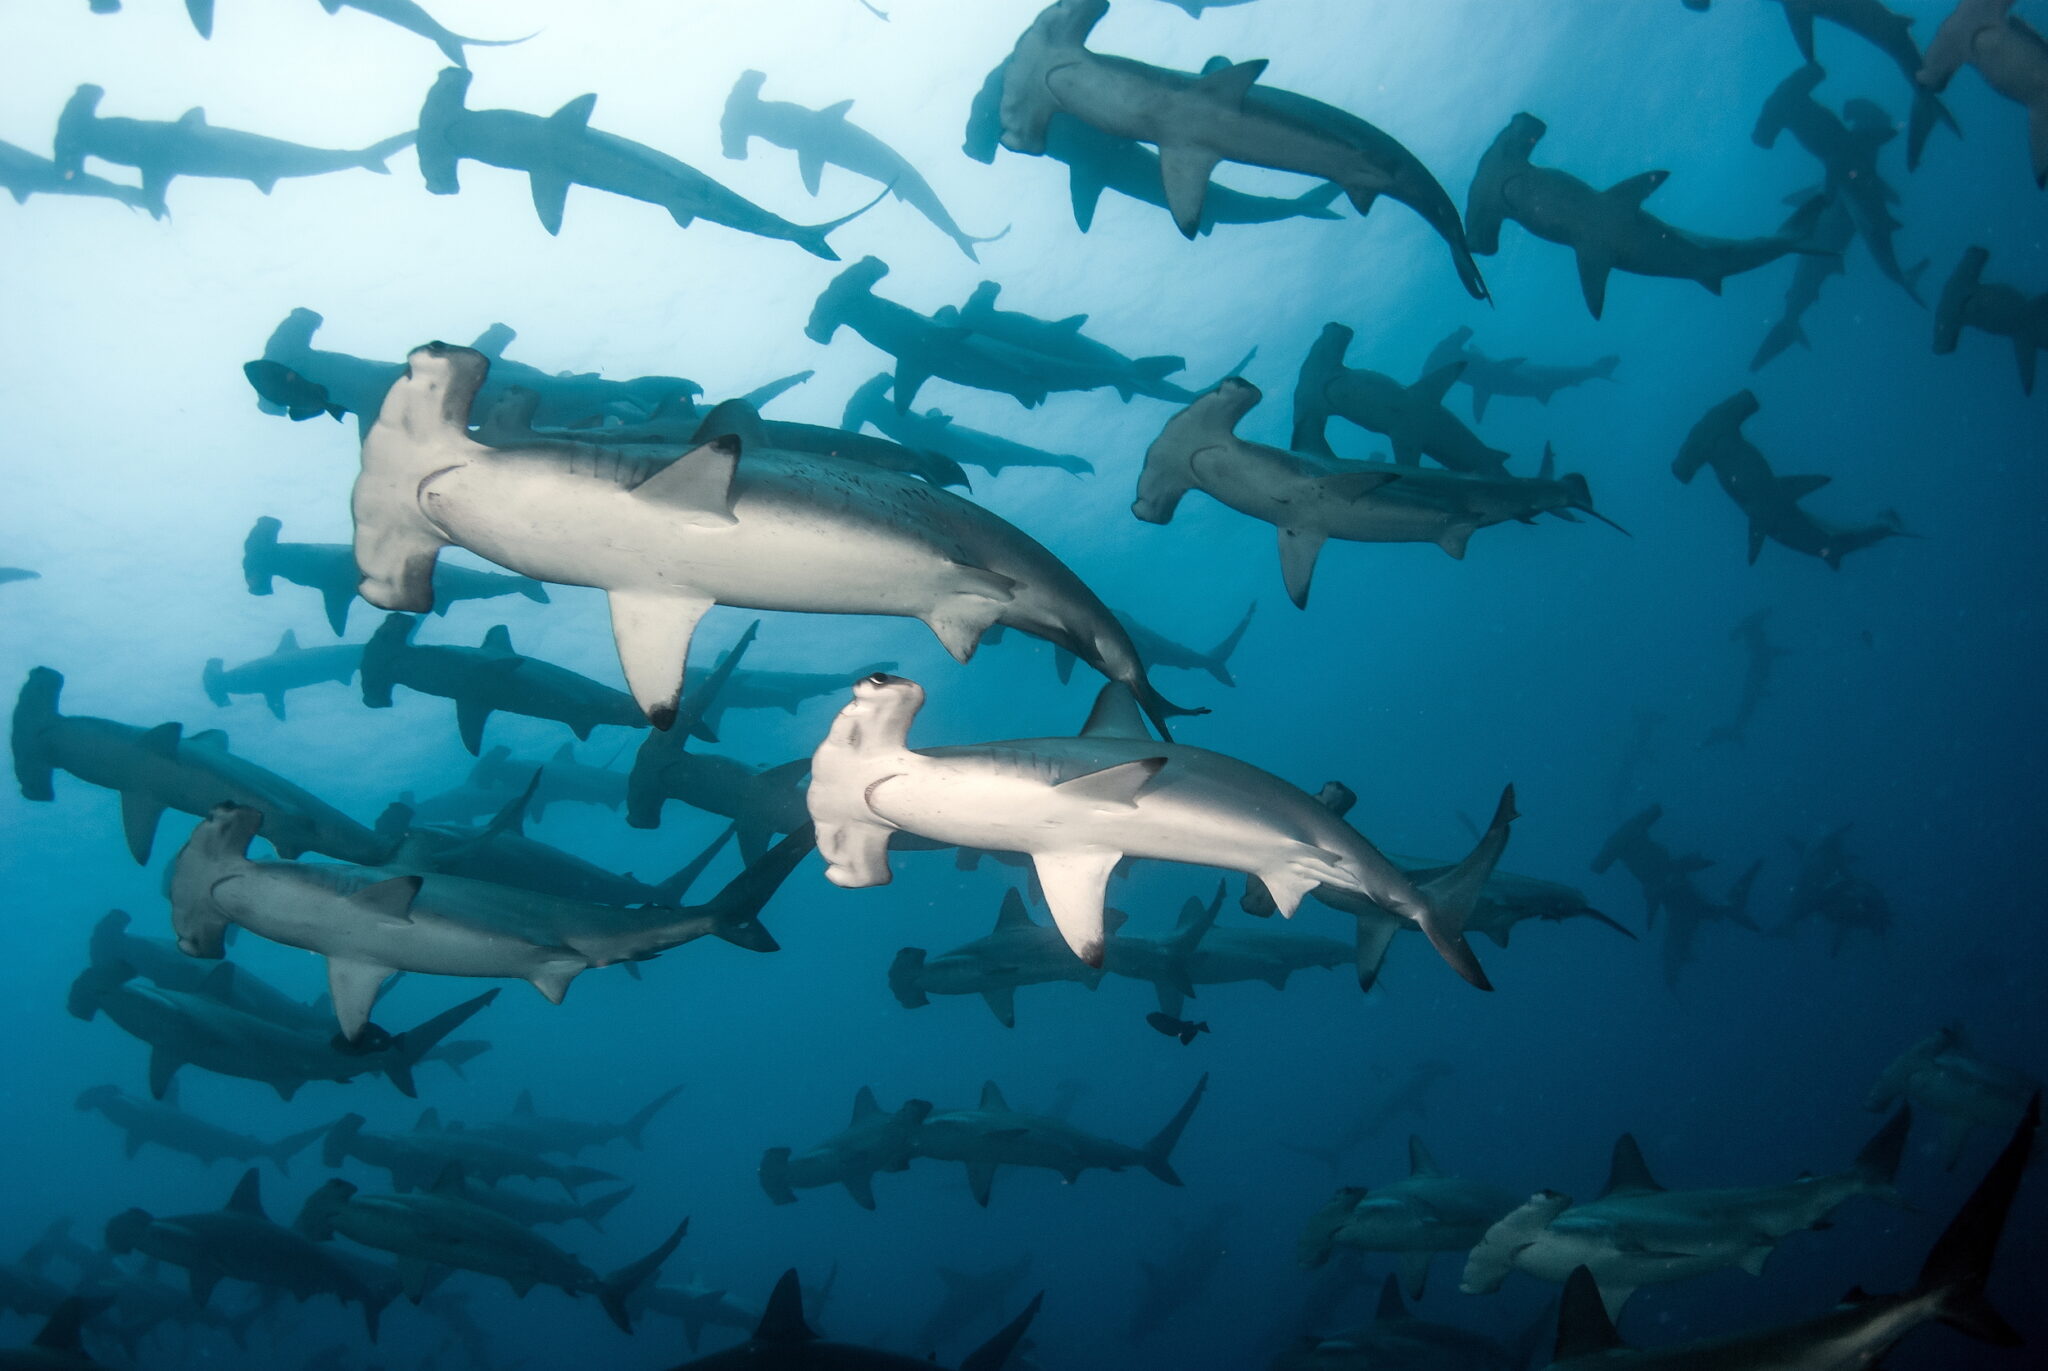 A group of hammerheads swim together in deep blue water